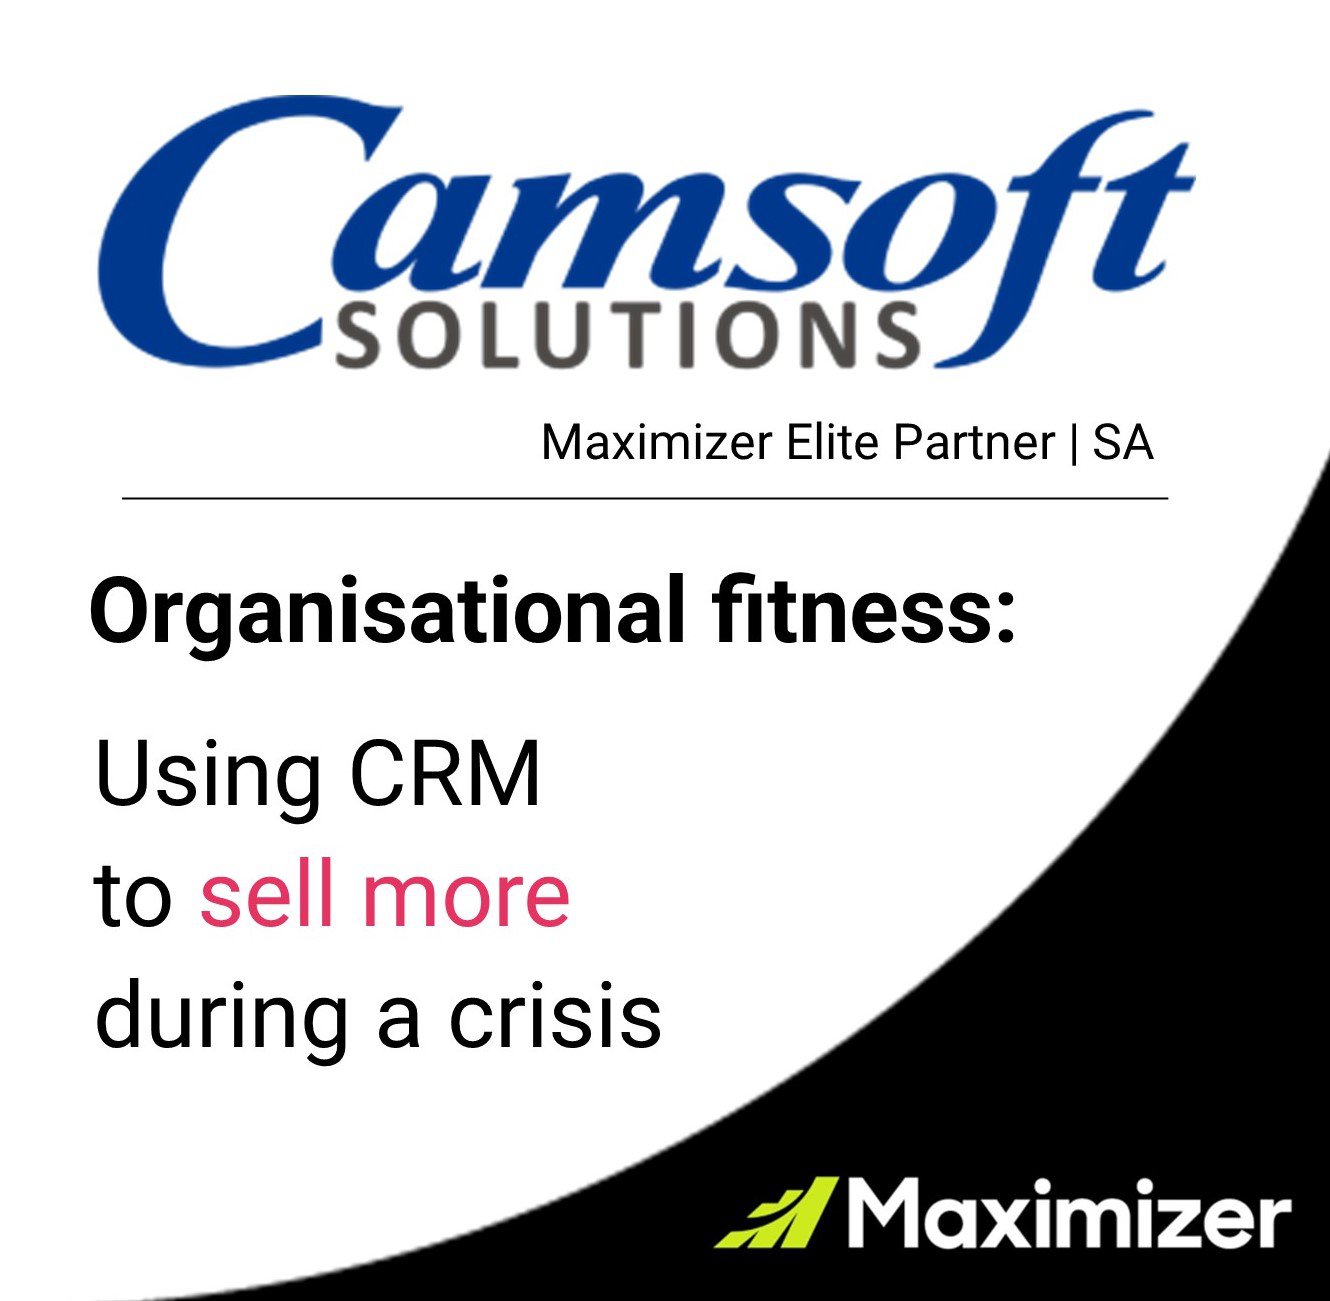 Elite Maximizer Partner Camsoft links CRM to organizational fitness and the power to sell more cover